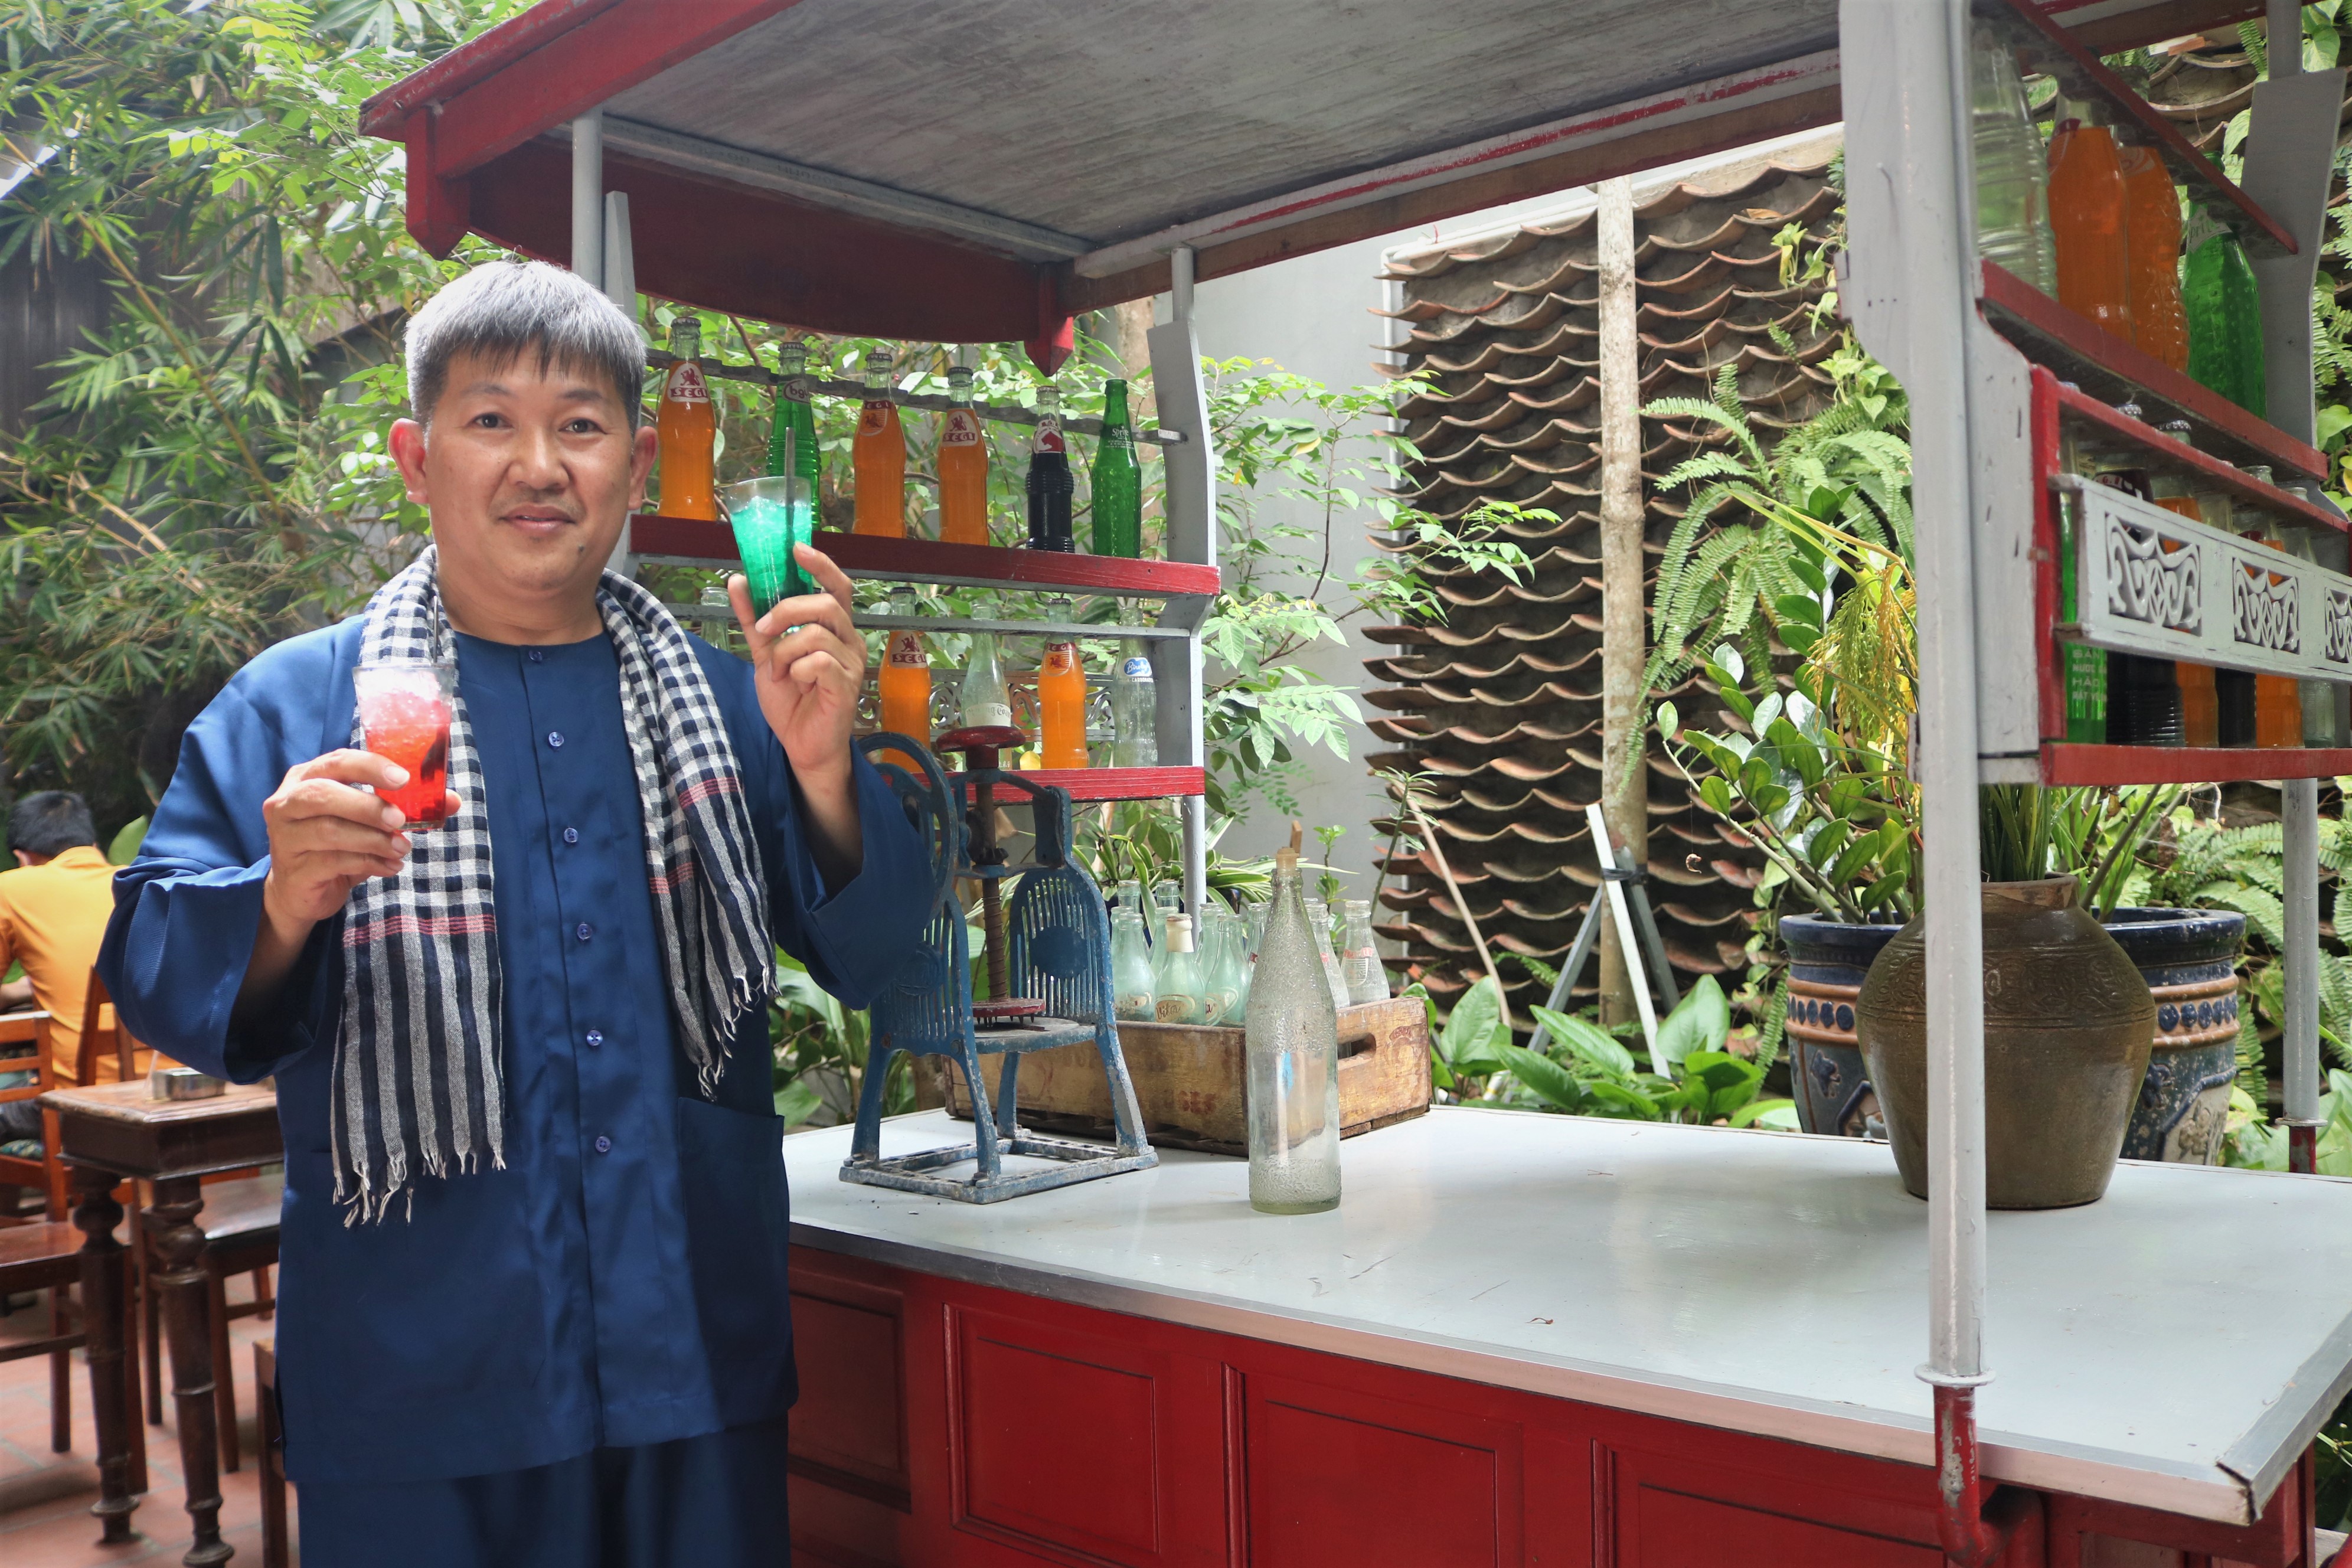 A pre-1975 beverage cart on display at Lua Sai Gon café in Phu Nhuan District, Ho Chi Minh City. Photo: Hoang An / Tuoi Tre News